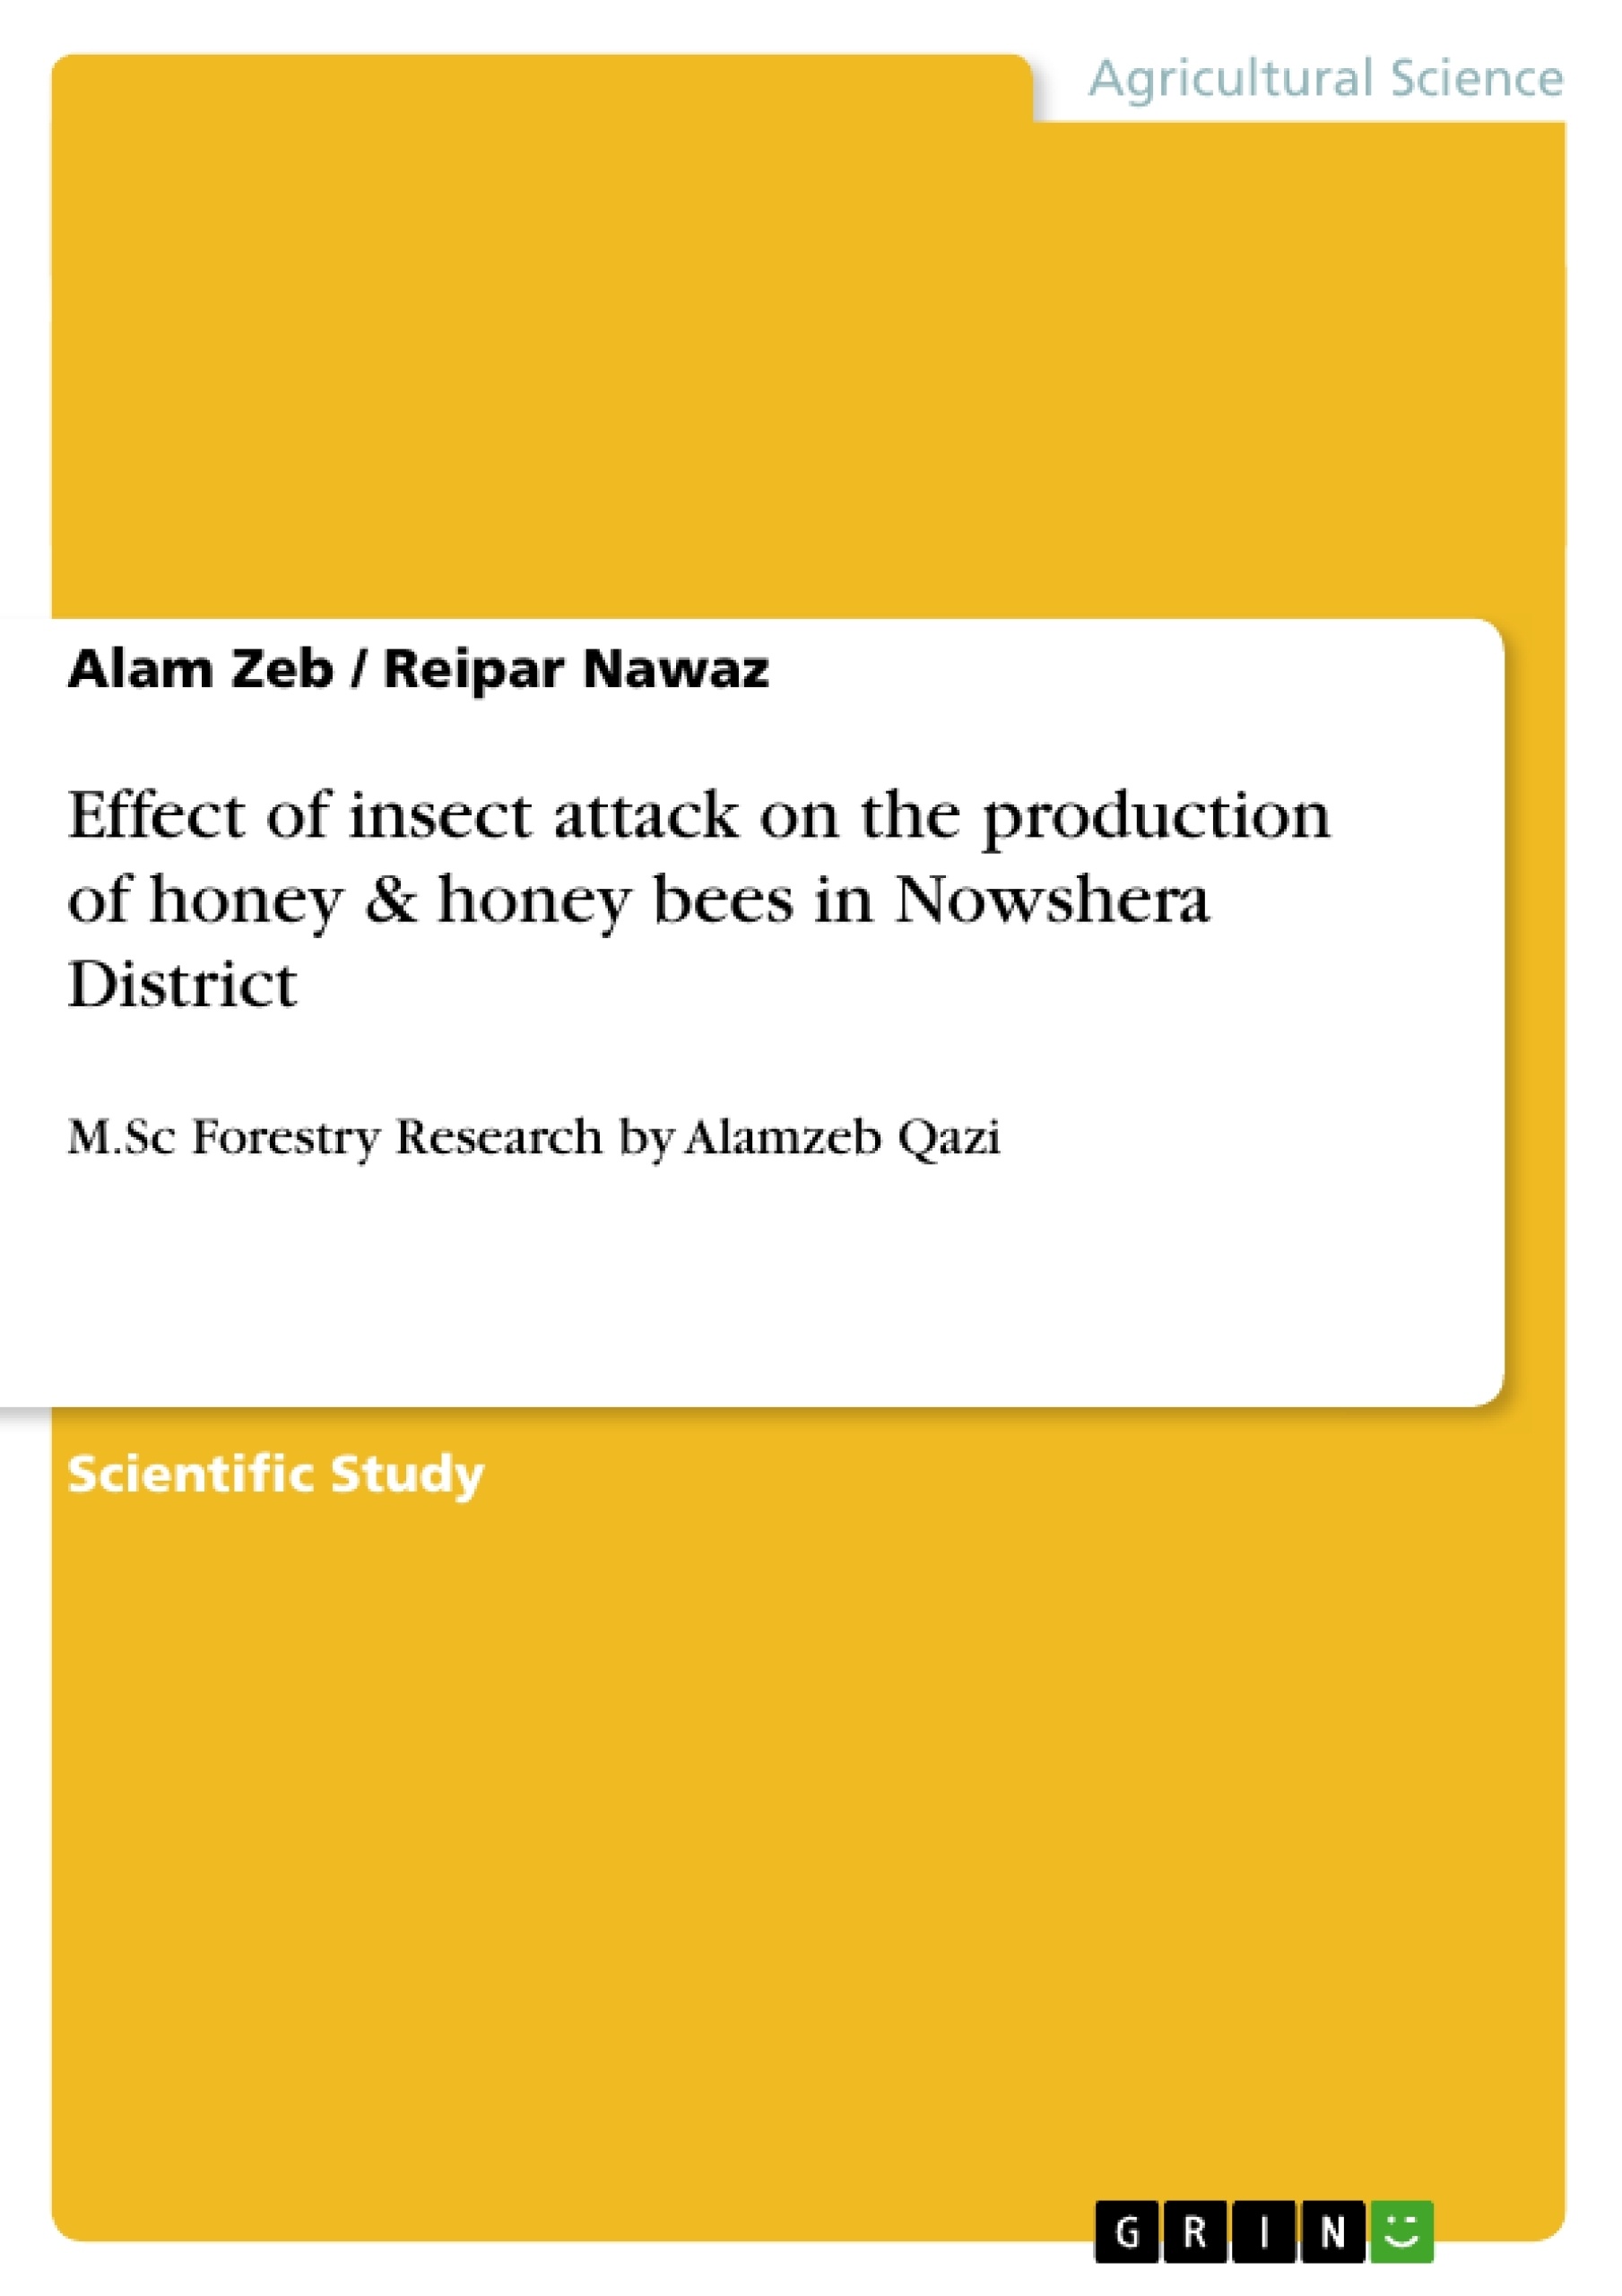 Title: Effect of insect attack on the production of honey & honey bees in Nowshera District